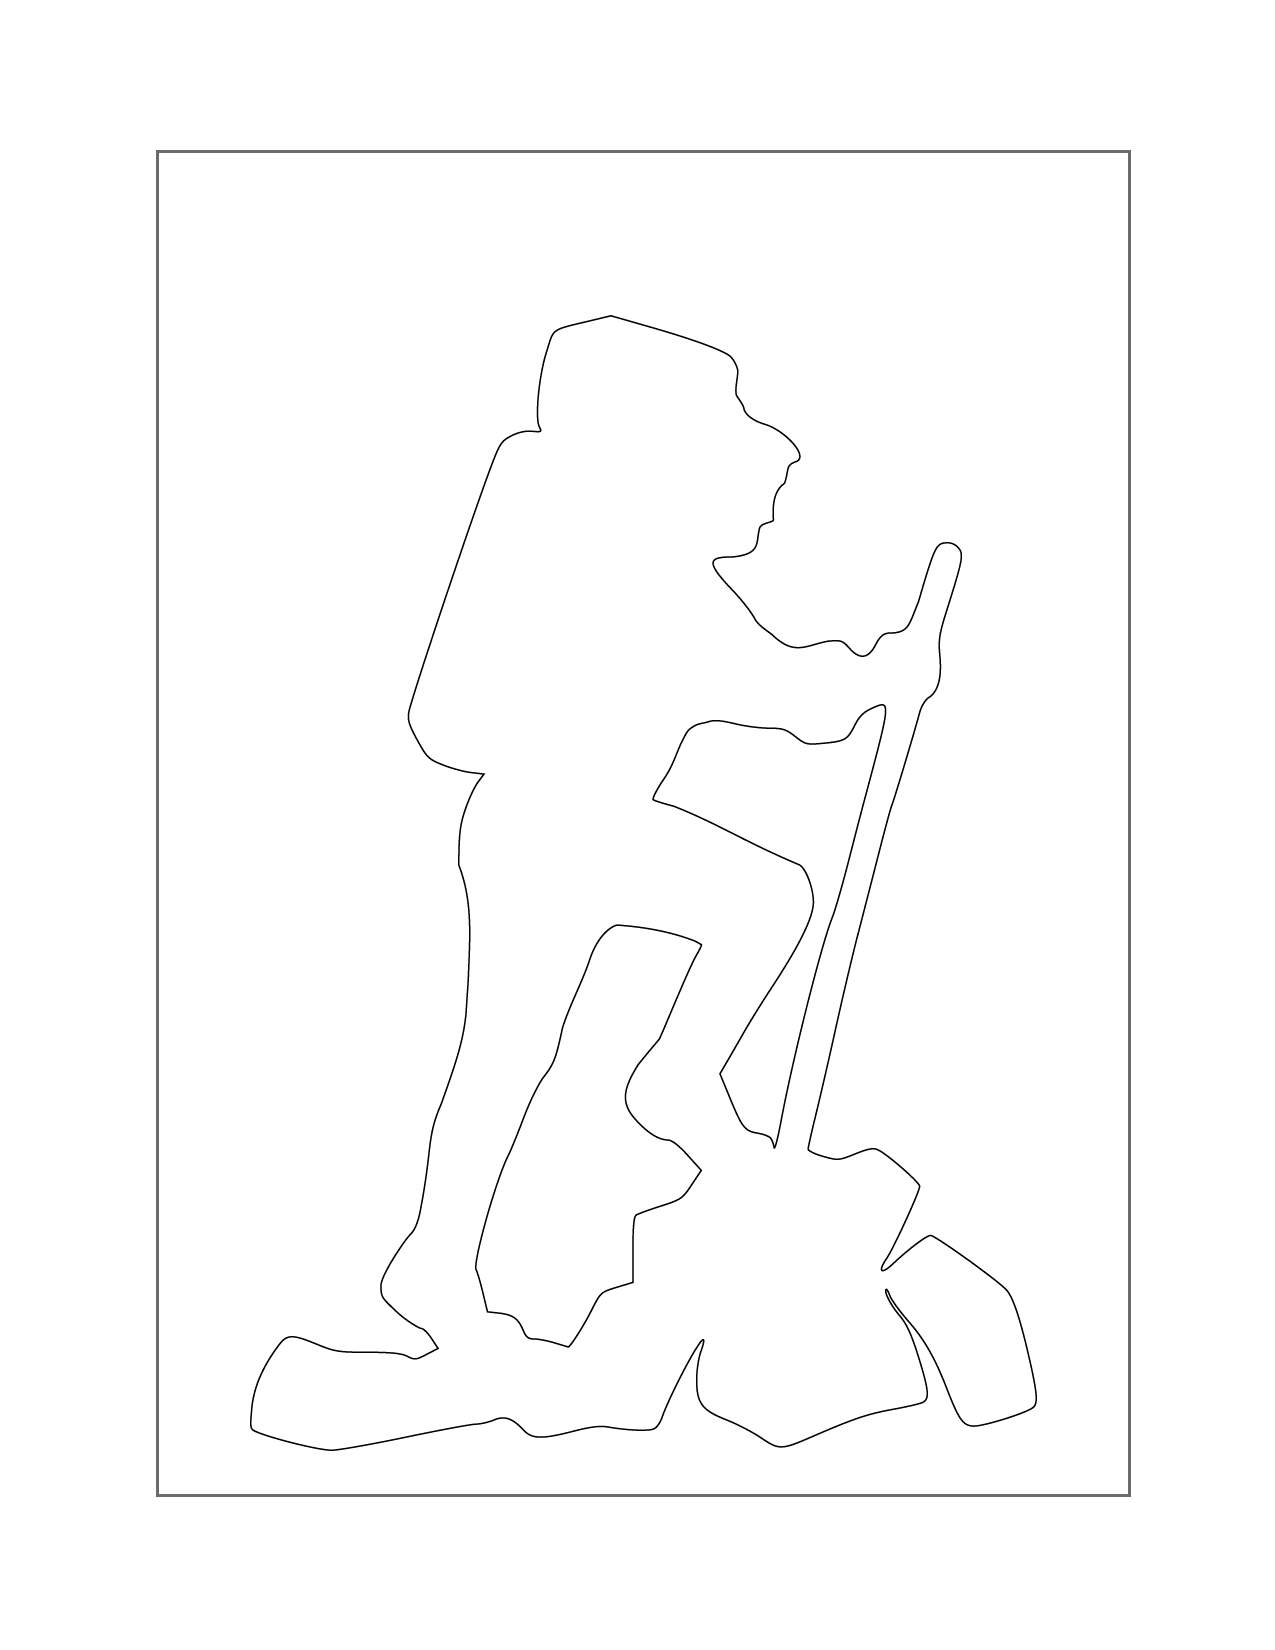 Backpack Mountain Climber Coloring Page